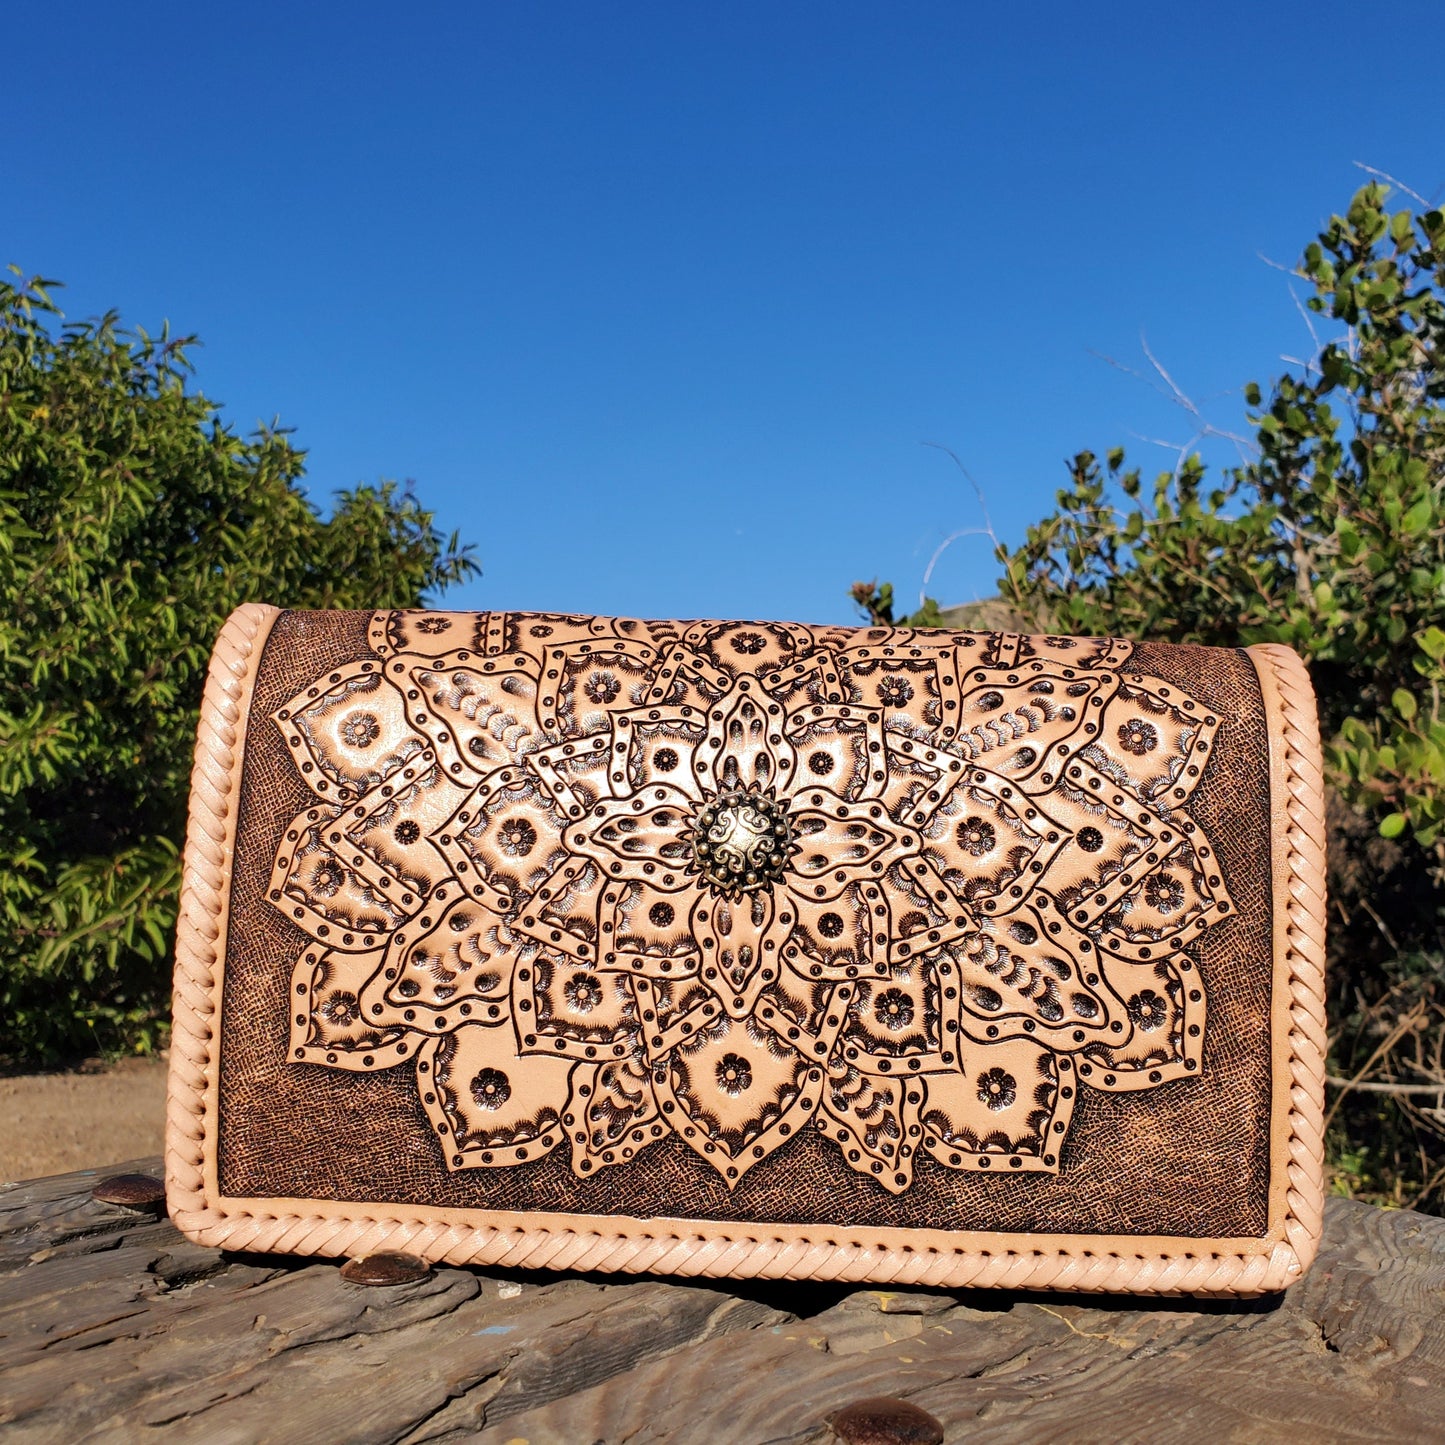 Hand Made Leather Crossbody Bag "CECELIA" by MIOHERMOSA Natural Cecilia Mayan Middle